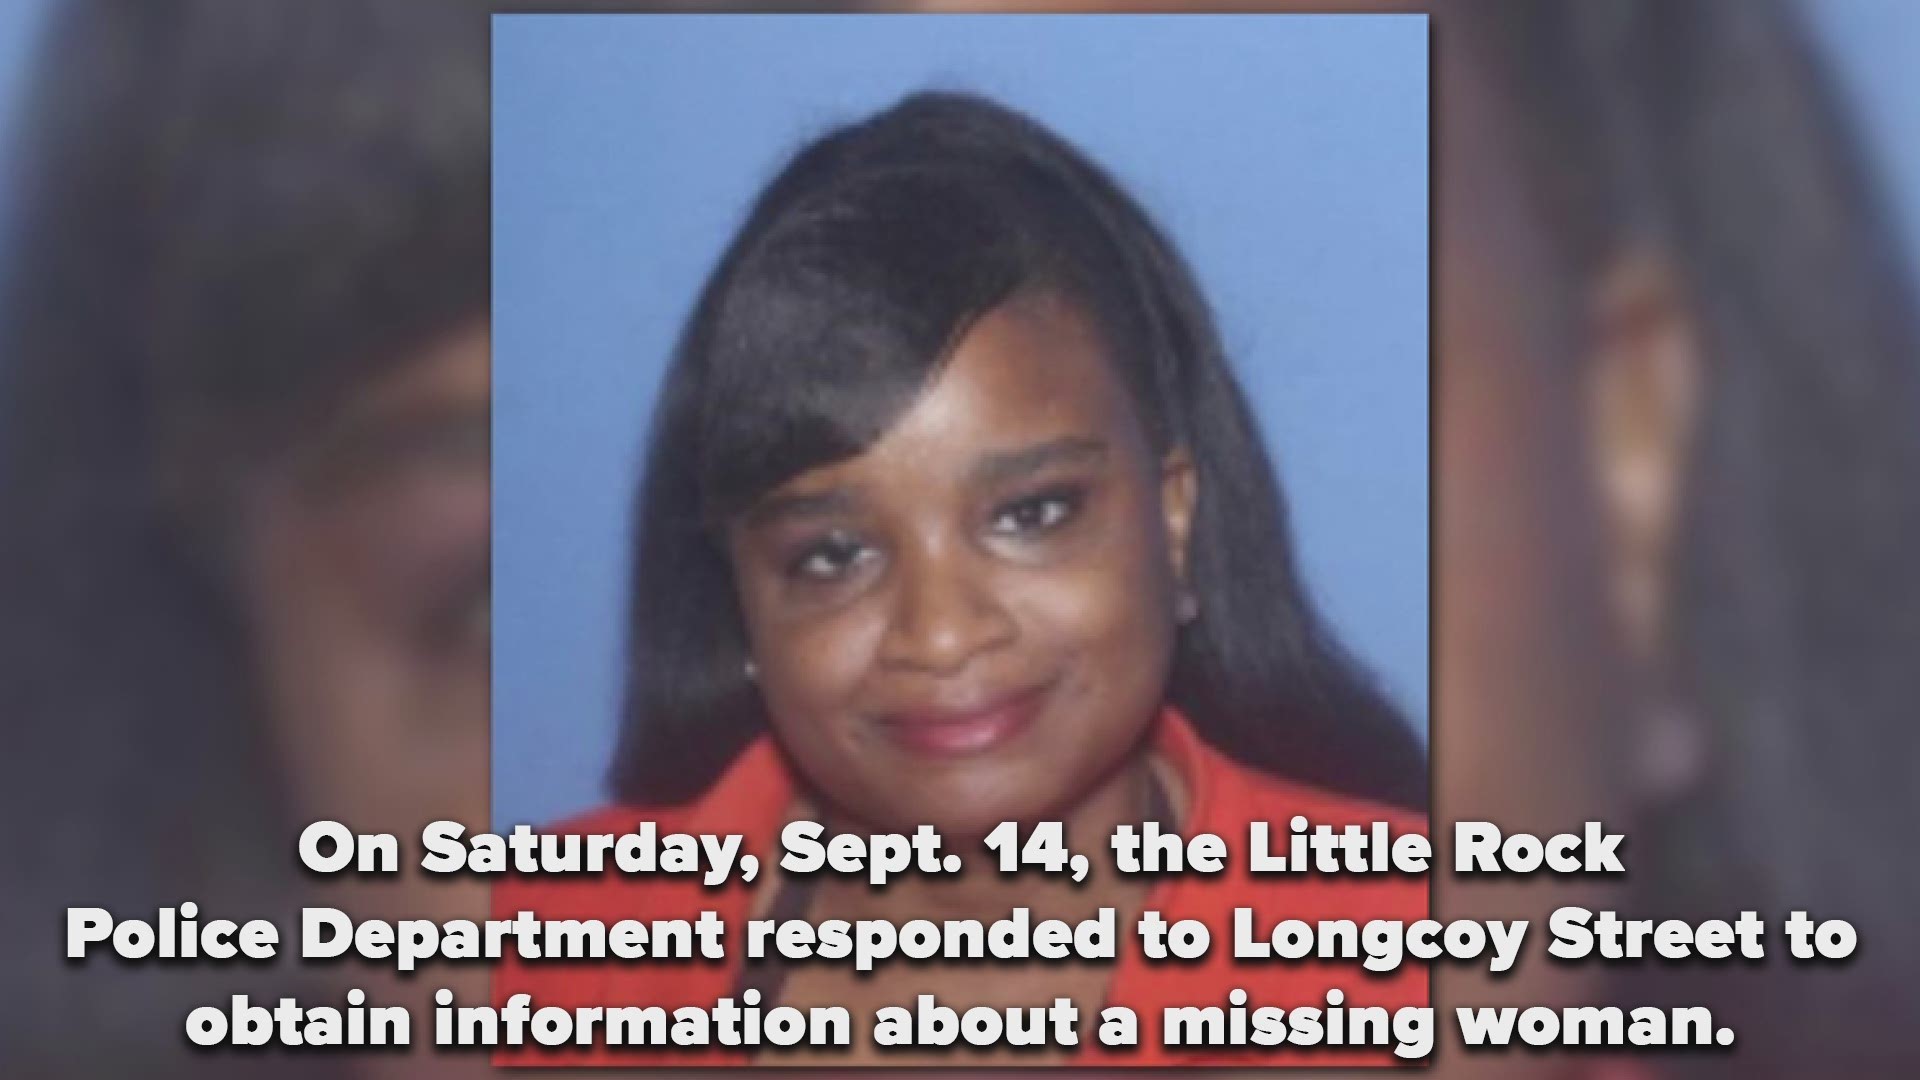 On Saturday, Sept. 14, the Little Rock Police Department responded to Longcoy Street to obtain information about a missing woman.